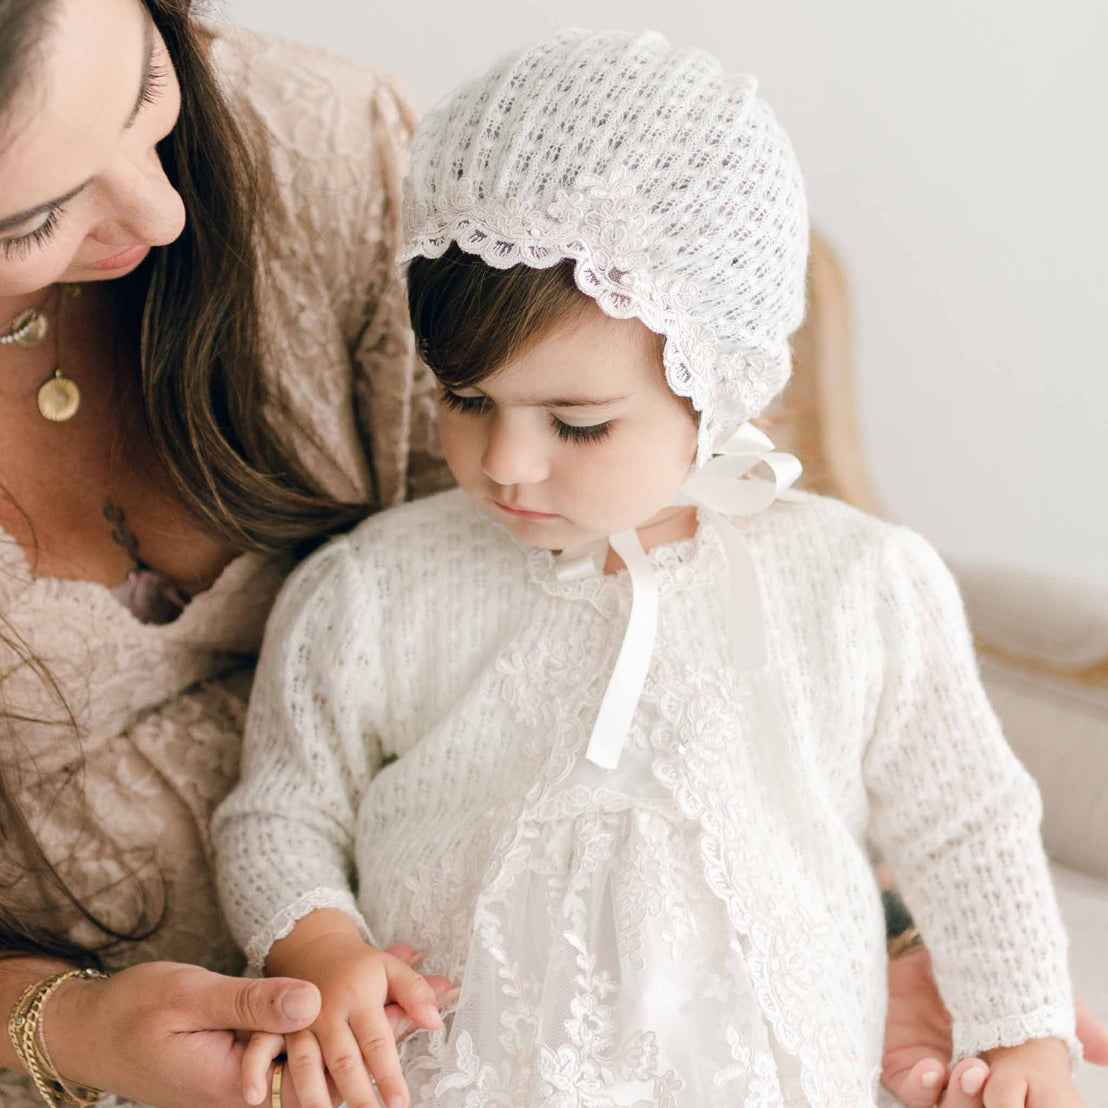 Baby girl wearing knit sweater and bonnet, holding her moms hand.